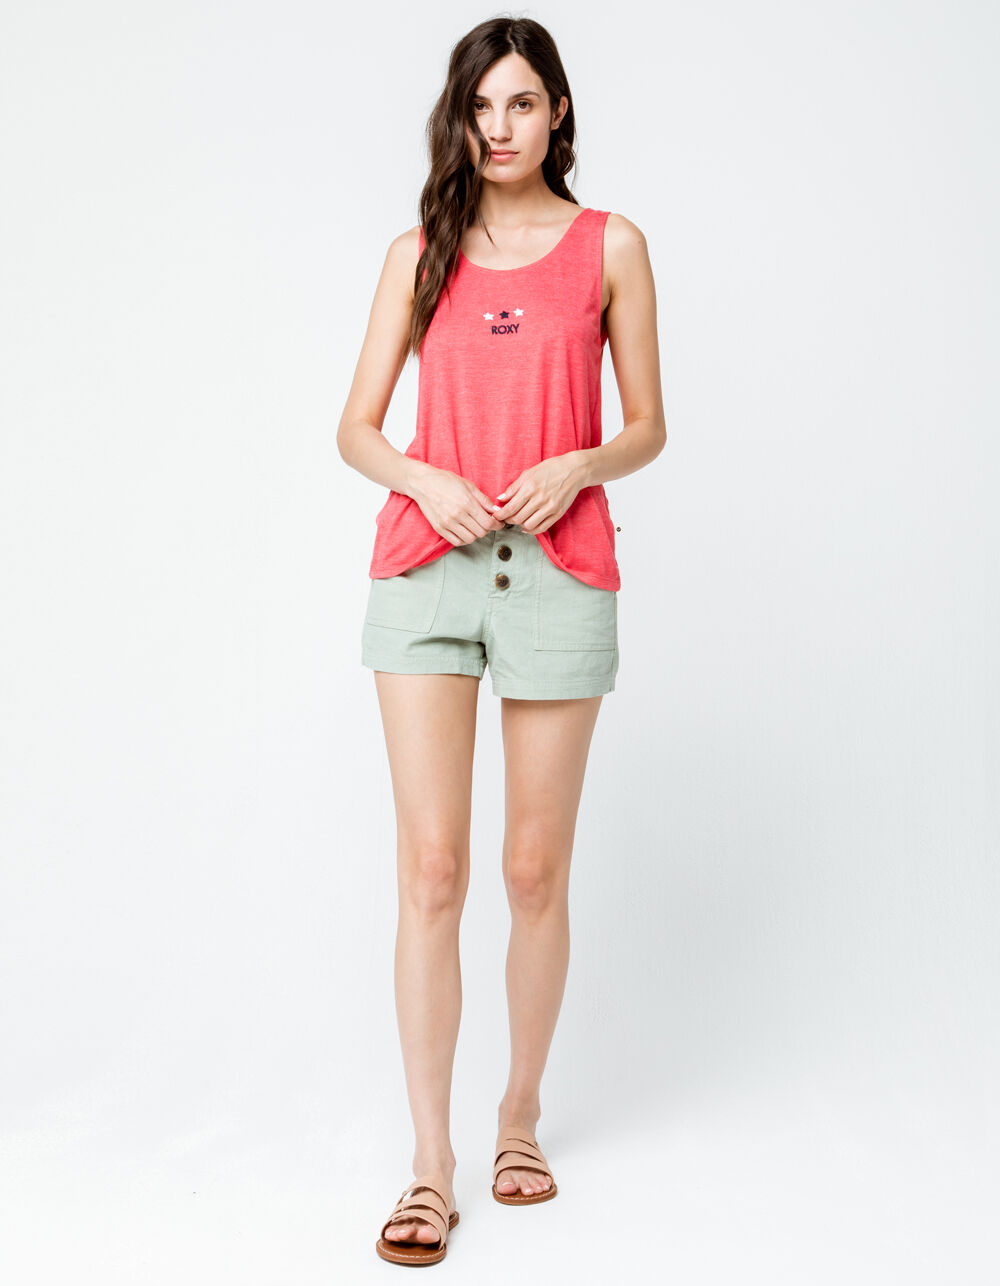 ROXY Summer Of Pop Womens Tank Top image number 3